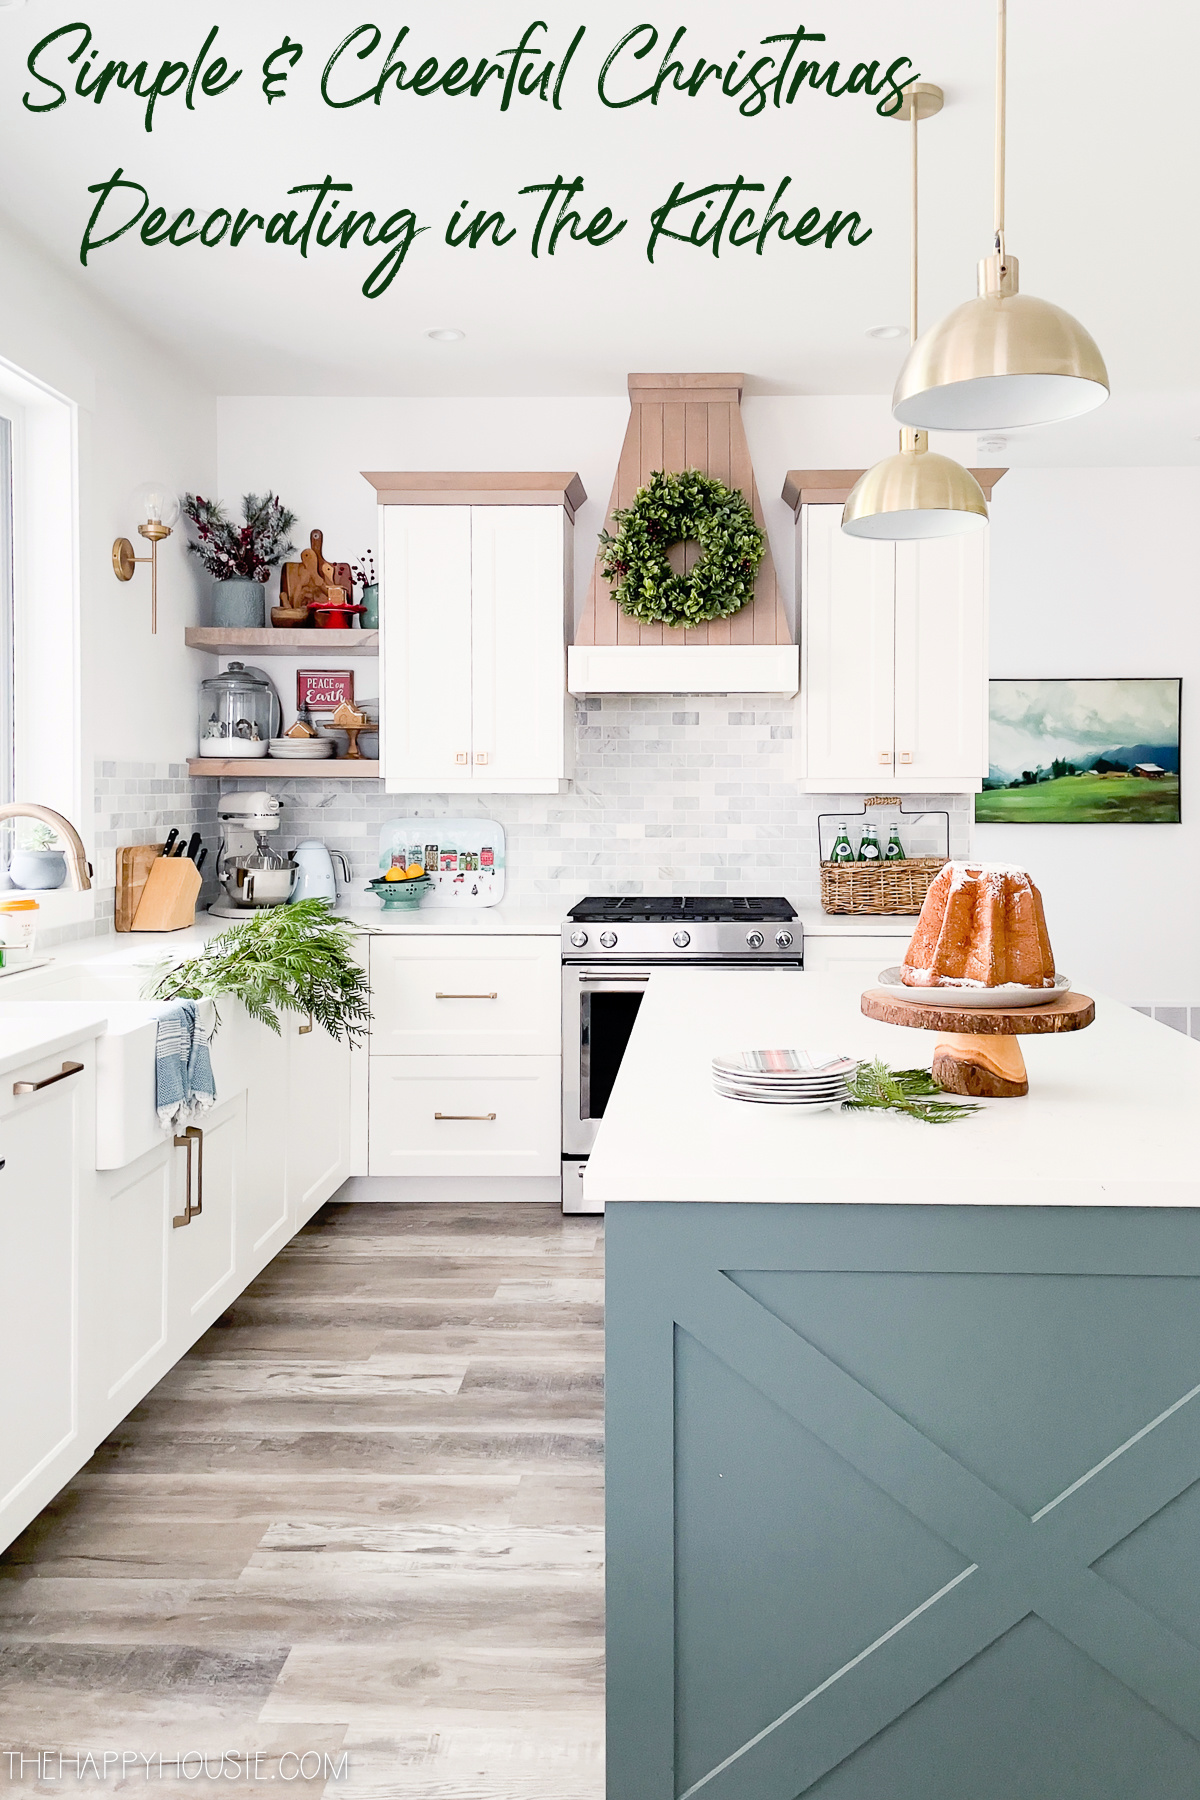 Simple & Cheerful Christmas Decorating In The Kitchen graphic.